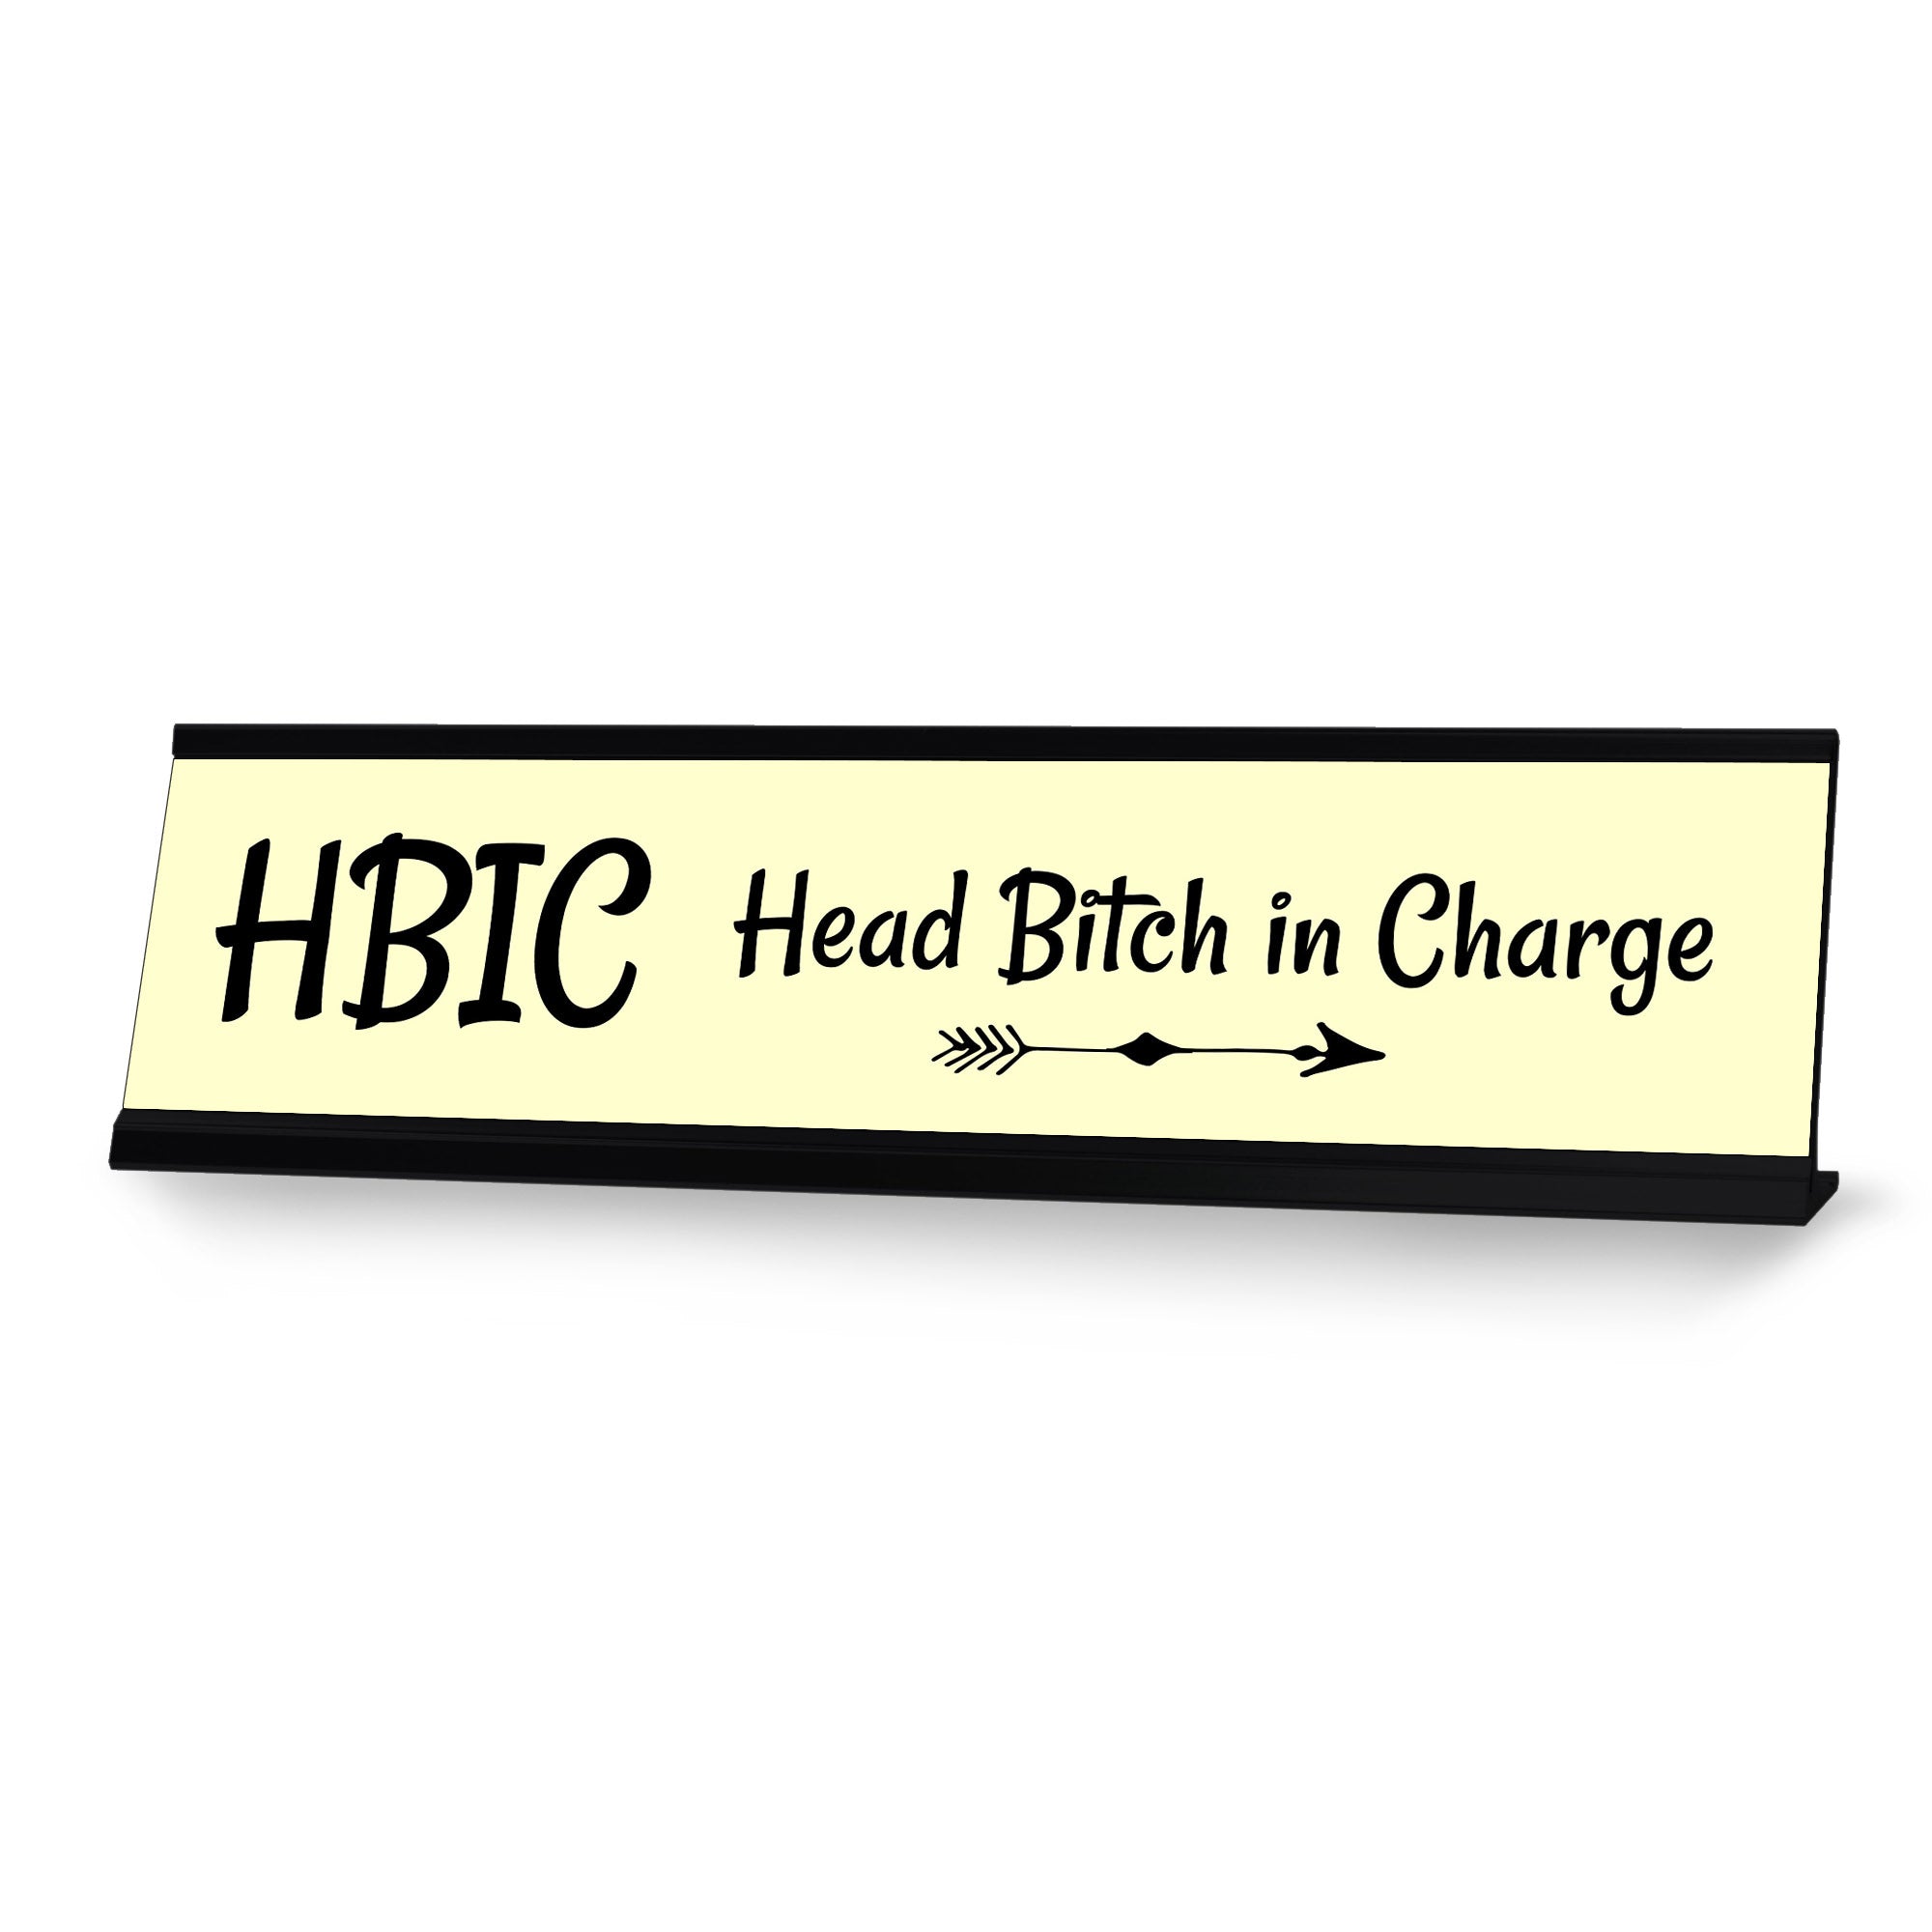 HBIC Head Bitch in Charge, Yellow Arrows Desk Sign (2 x 8")